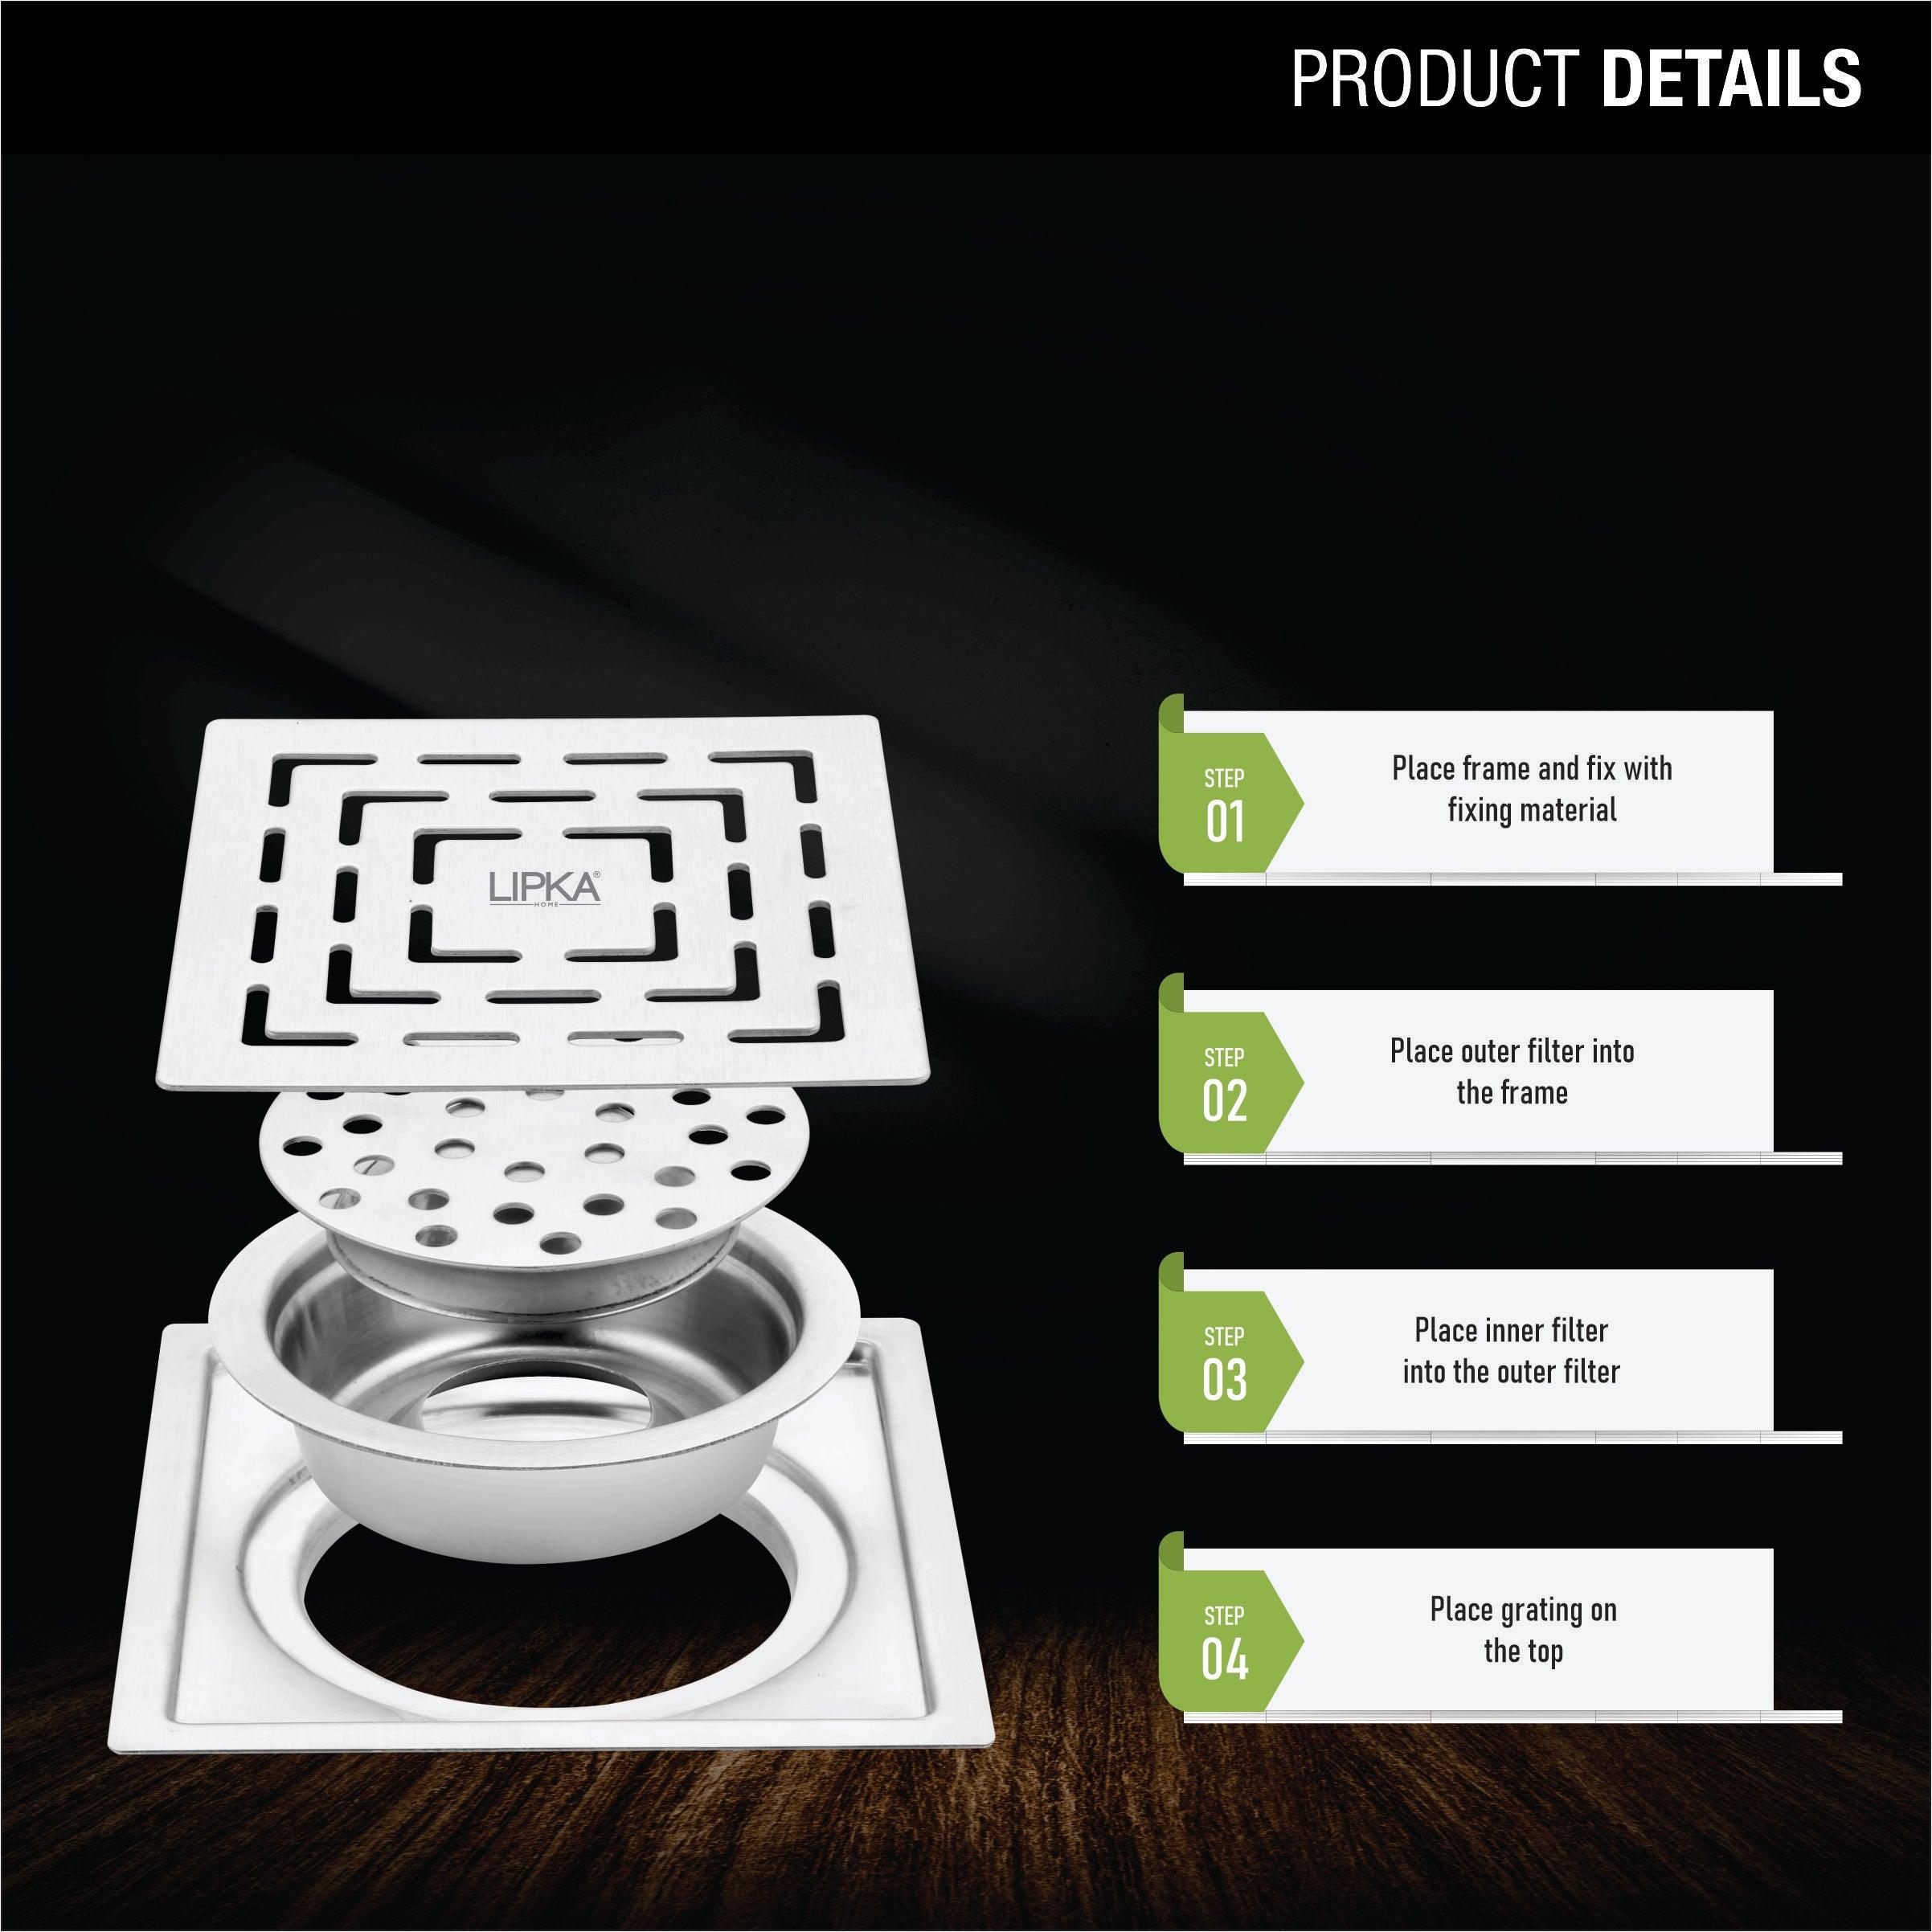 Orange Exclusive Square Flat Cut Floor Drain (6 x 6 Inches) with Cockroach Trap product details